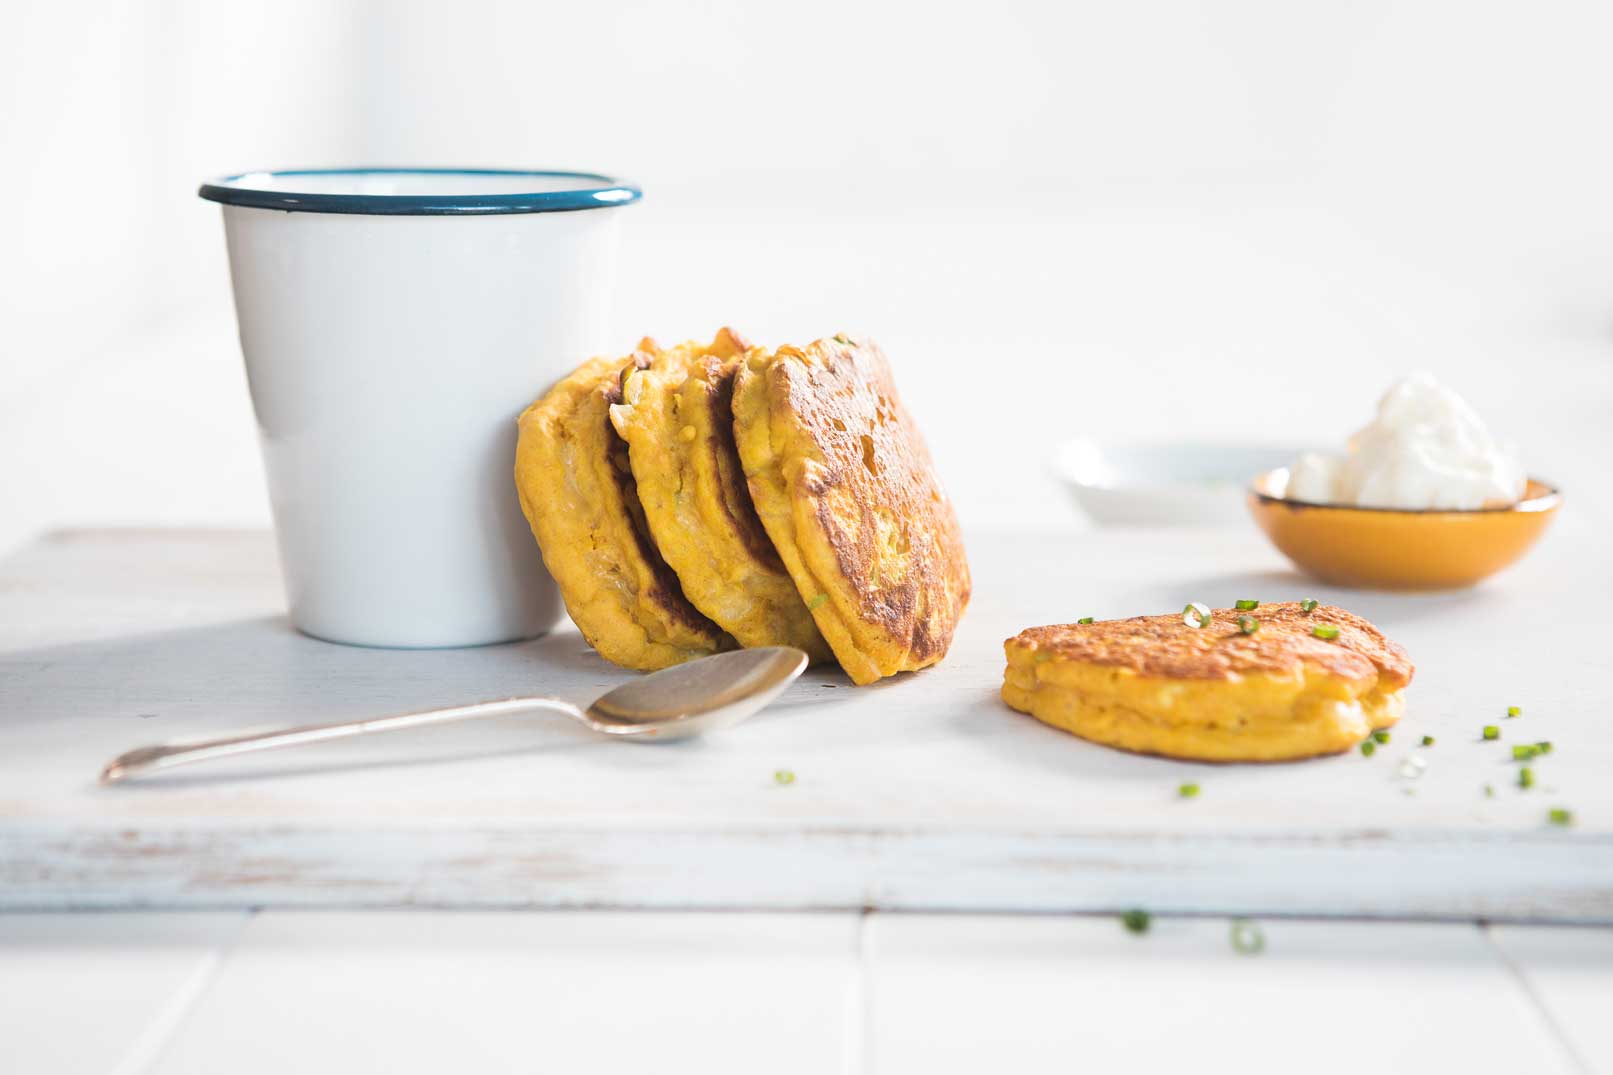 Image of four pumpkin and cheese pikelets with a cup and metal spoon with a side of creme fraiche